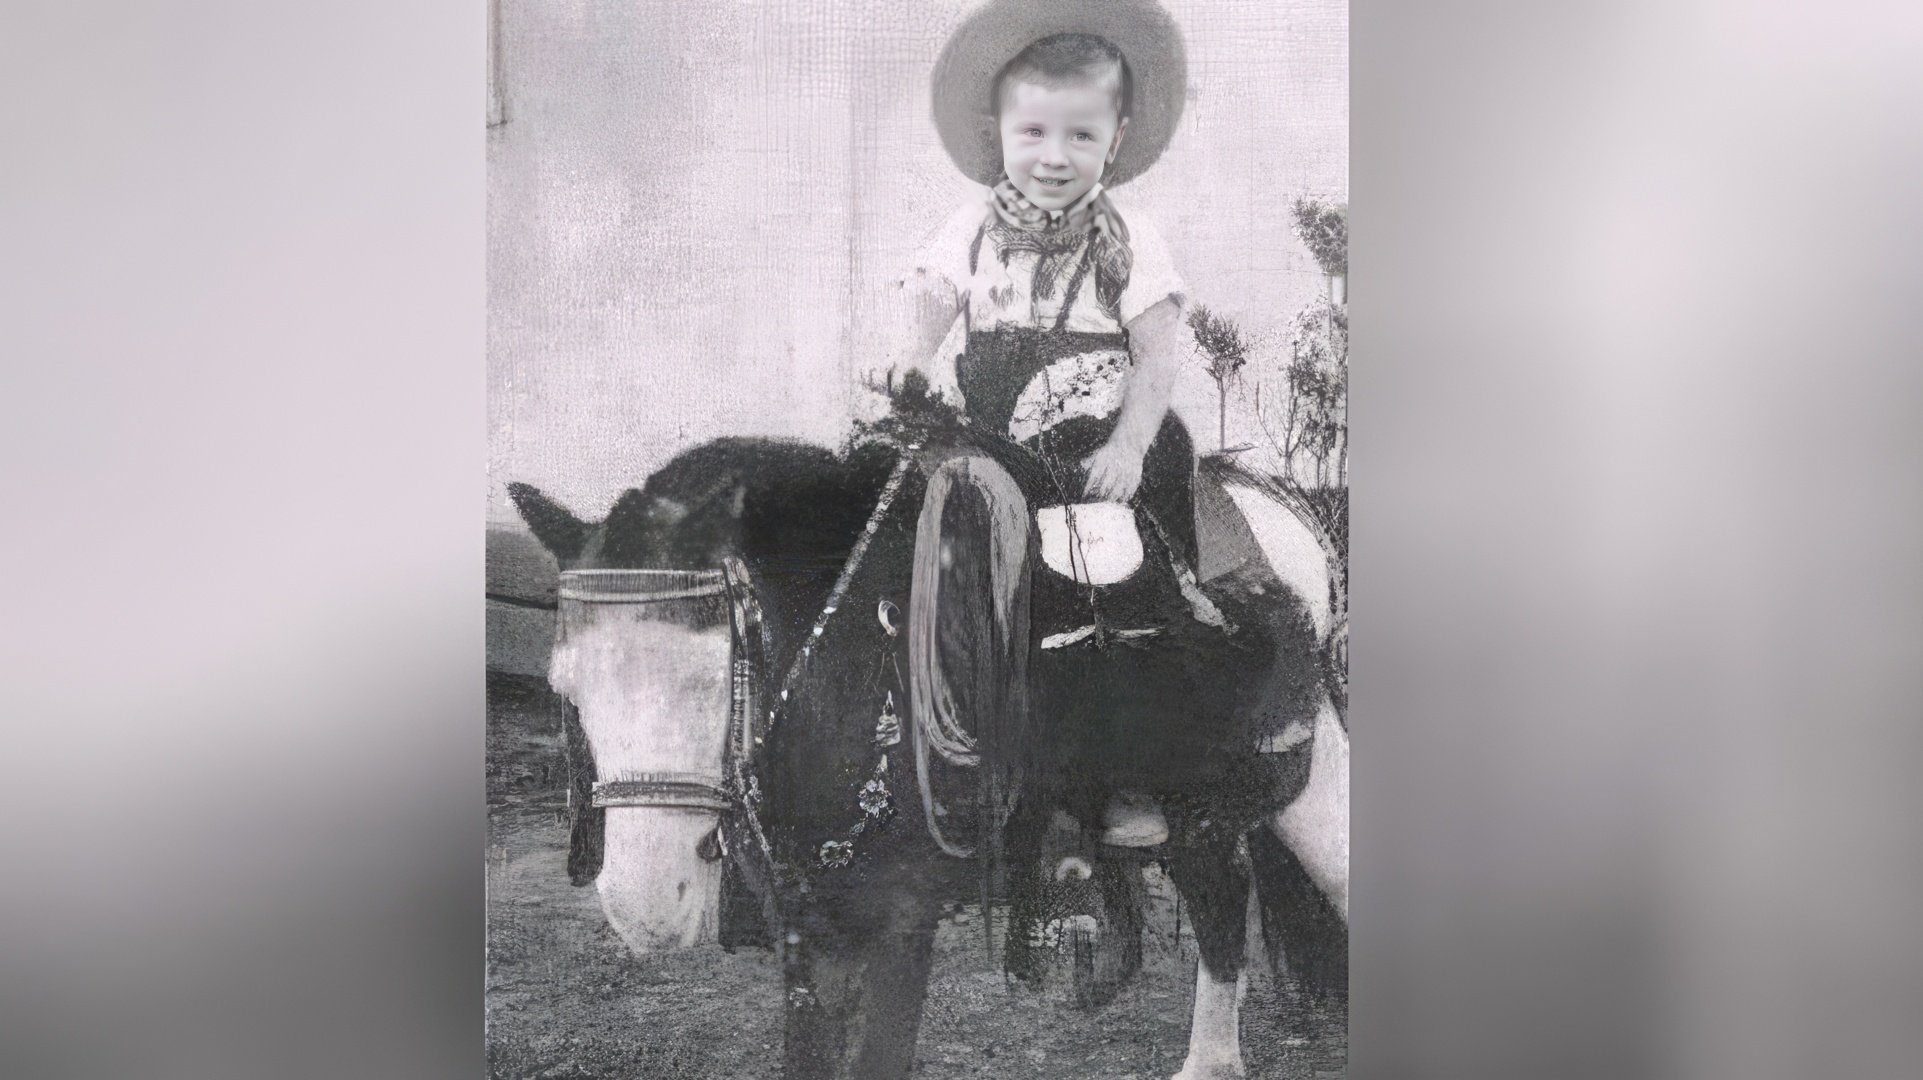 Chuck Norris as a child